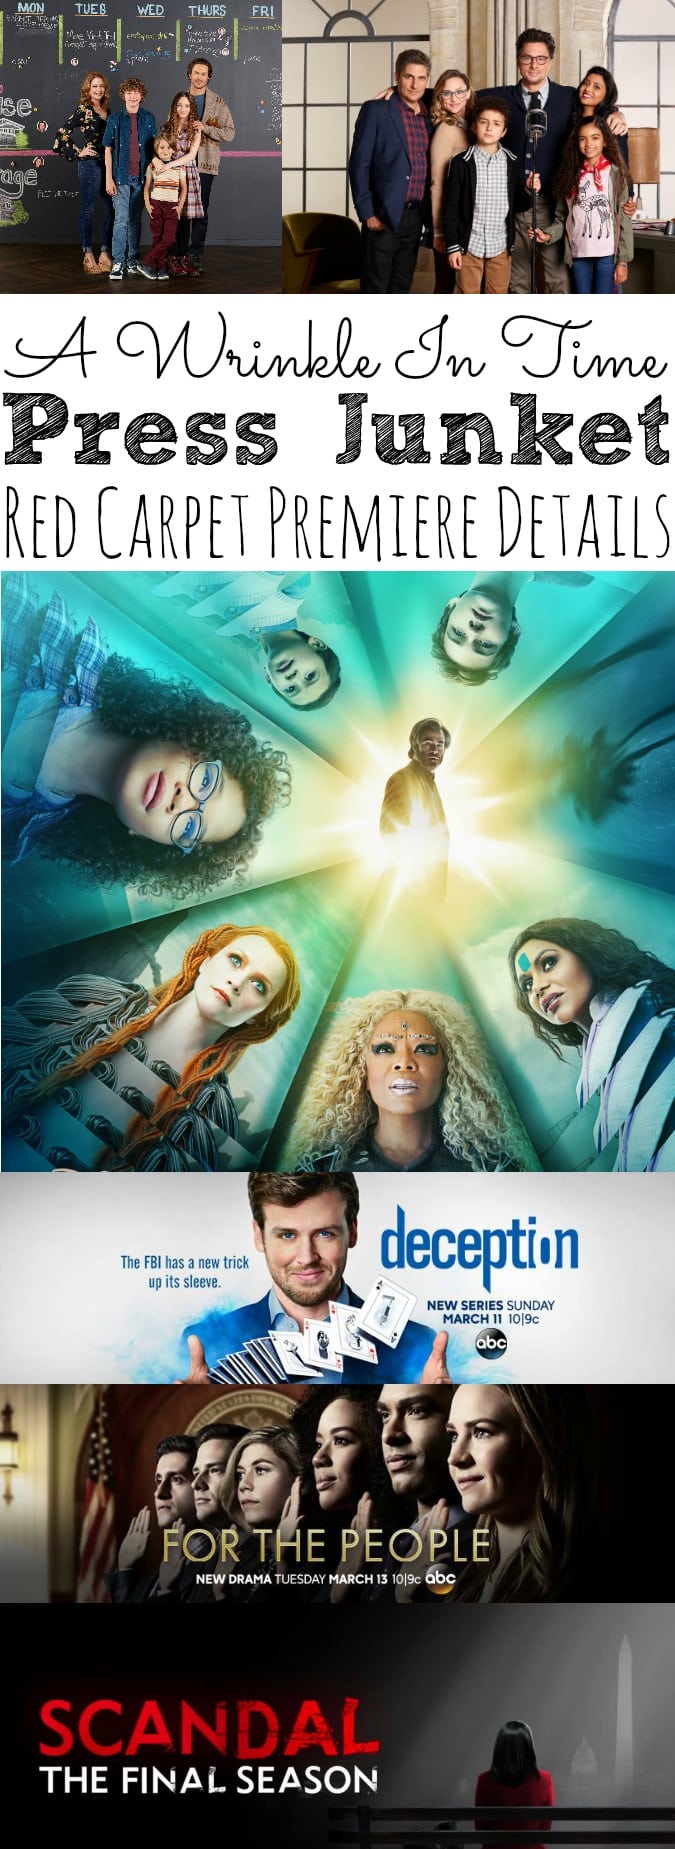 Finding The Tesseract In A Wrinkle In Time Movie Press Junket - simplytodaylife.com